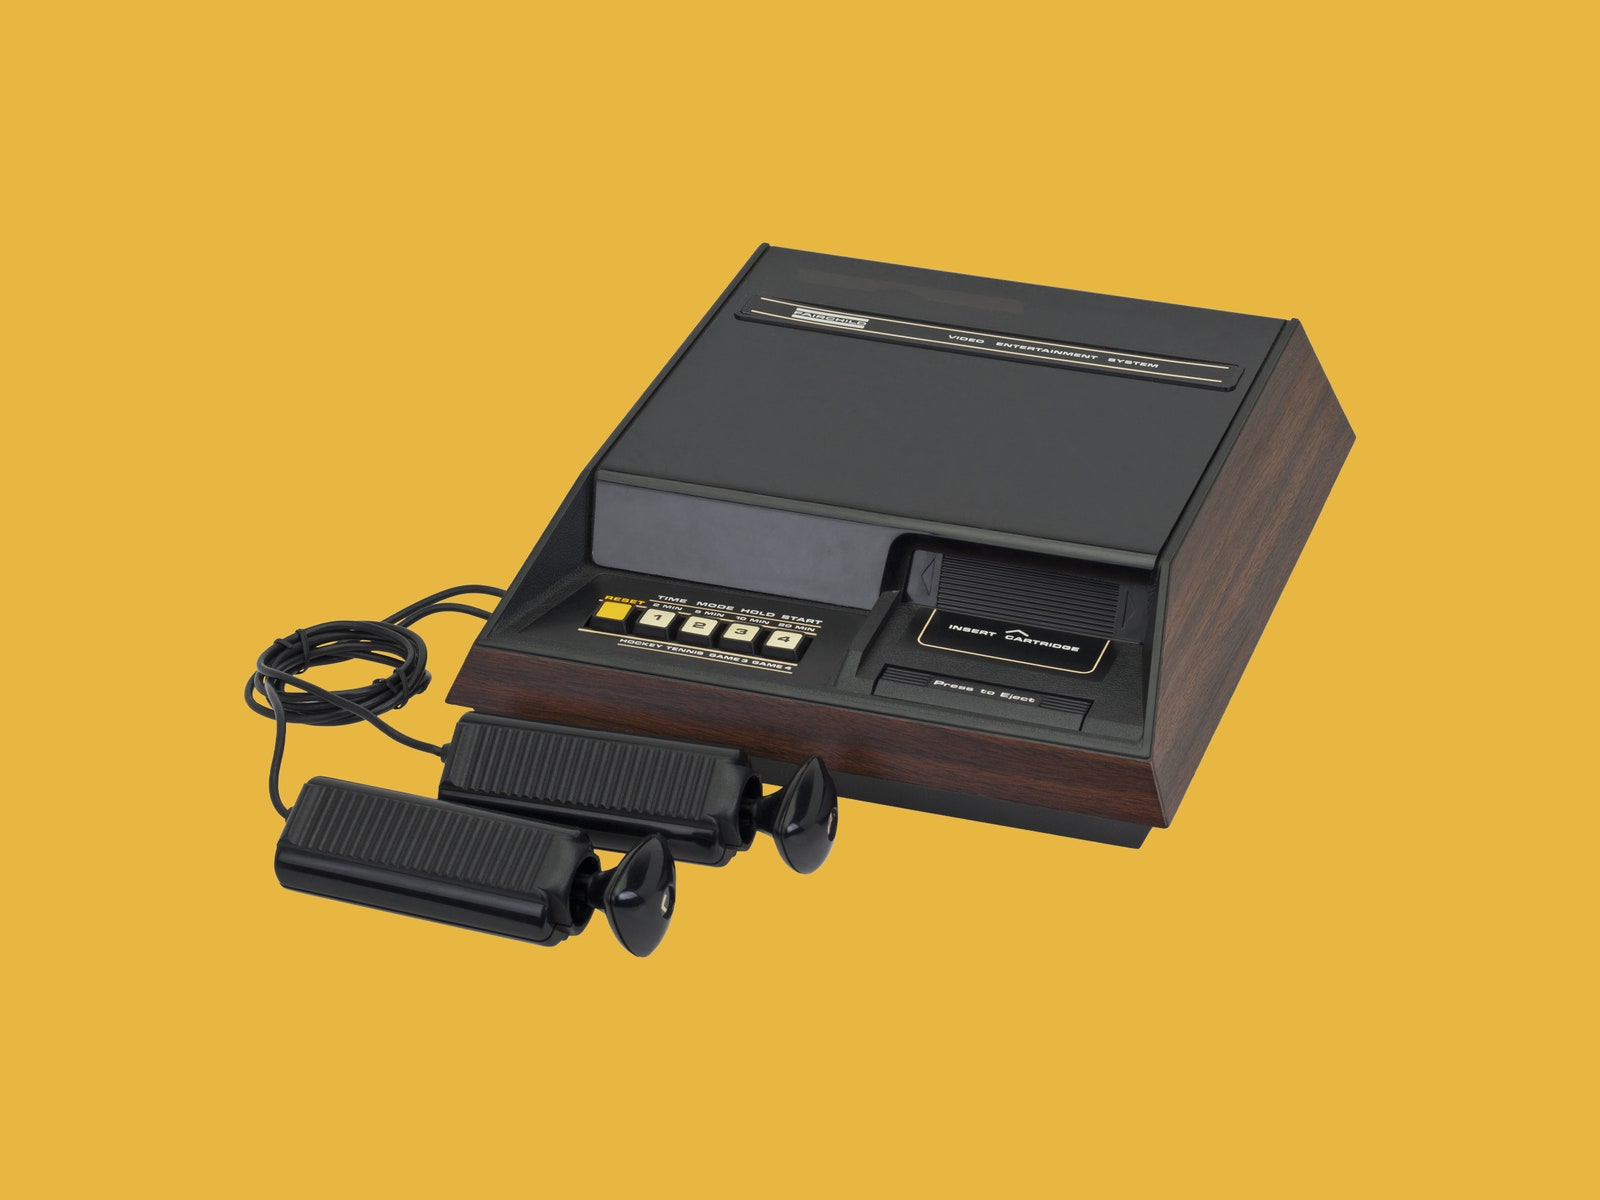 Fairchild Channel F gaming console